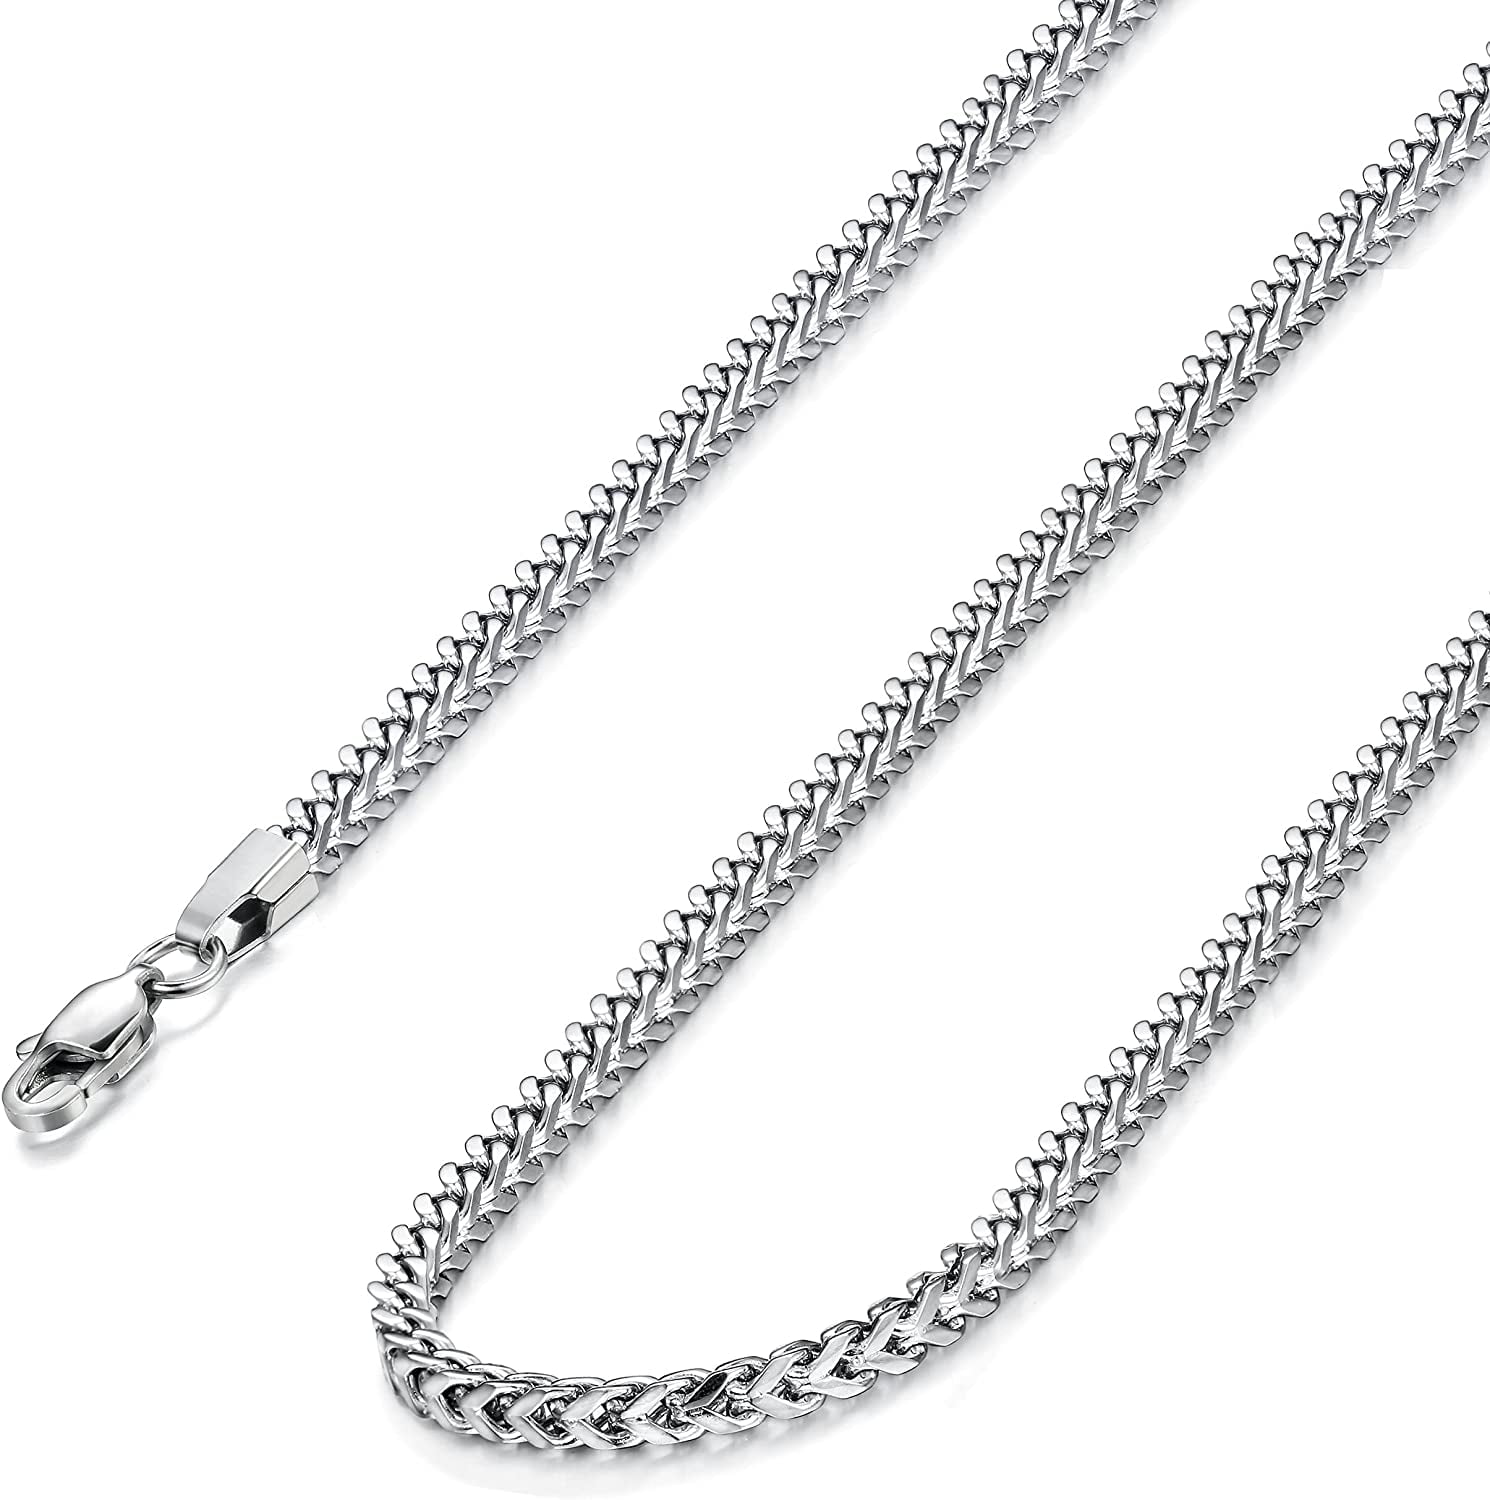 Black Stainless Steel Curb Chain Necklace